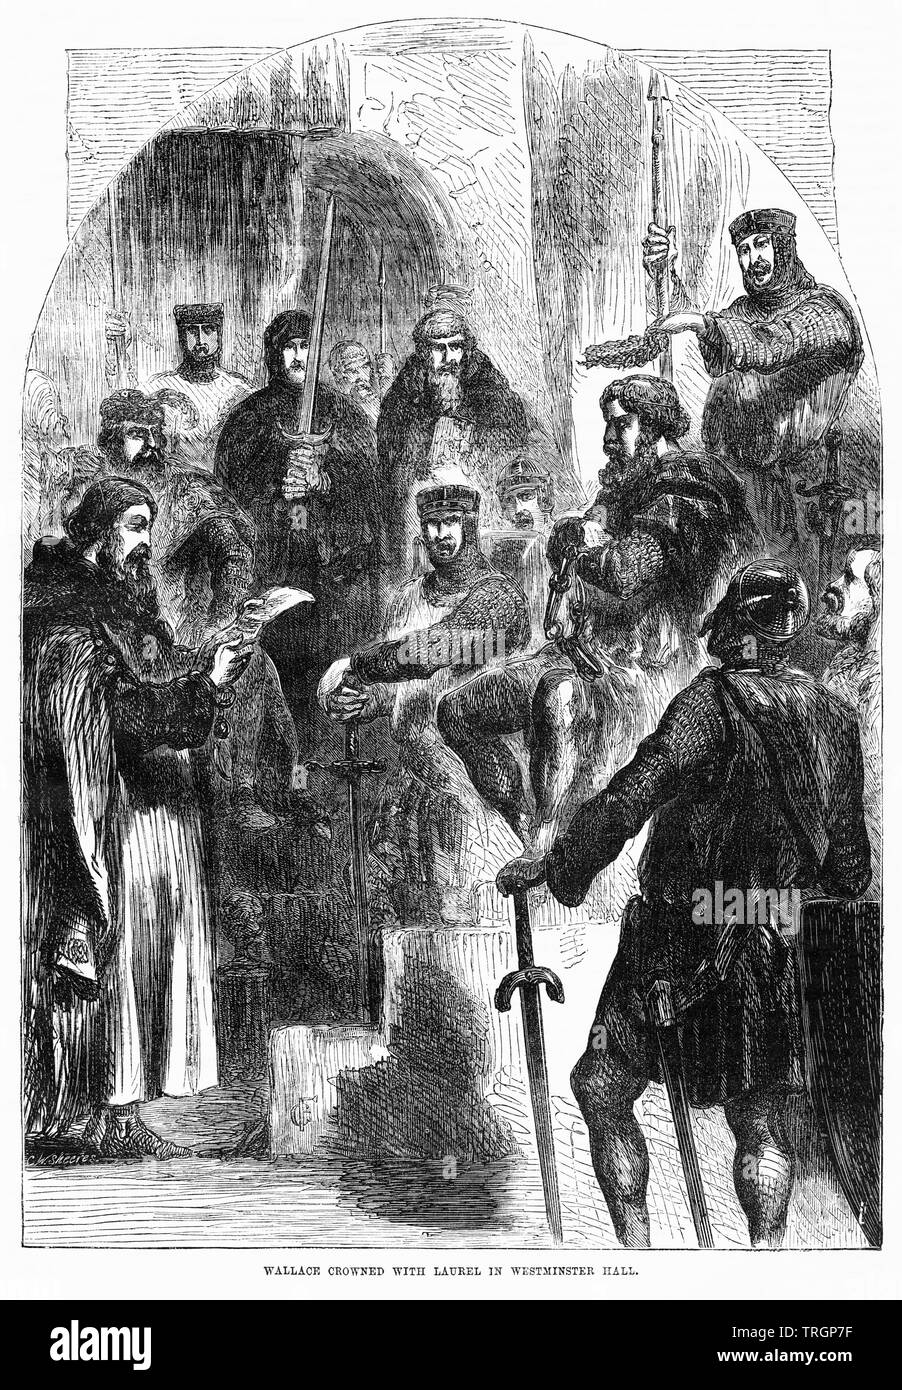 Wallace Crowned with Laurel in Westminster Hall, Illustration from John Cassell's Illustrated History of England, Vol. I from the earliest period to the reign of Edward the Fourth, Cassell, Petter and Galpin, 1857 Stock Photo